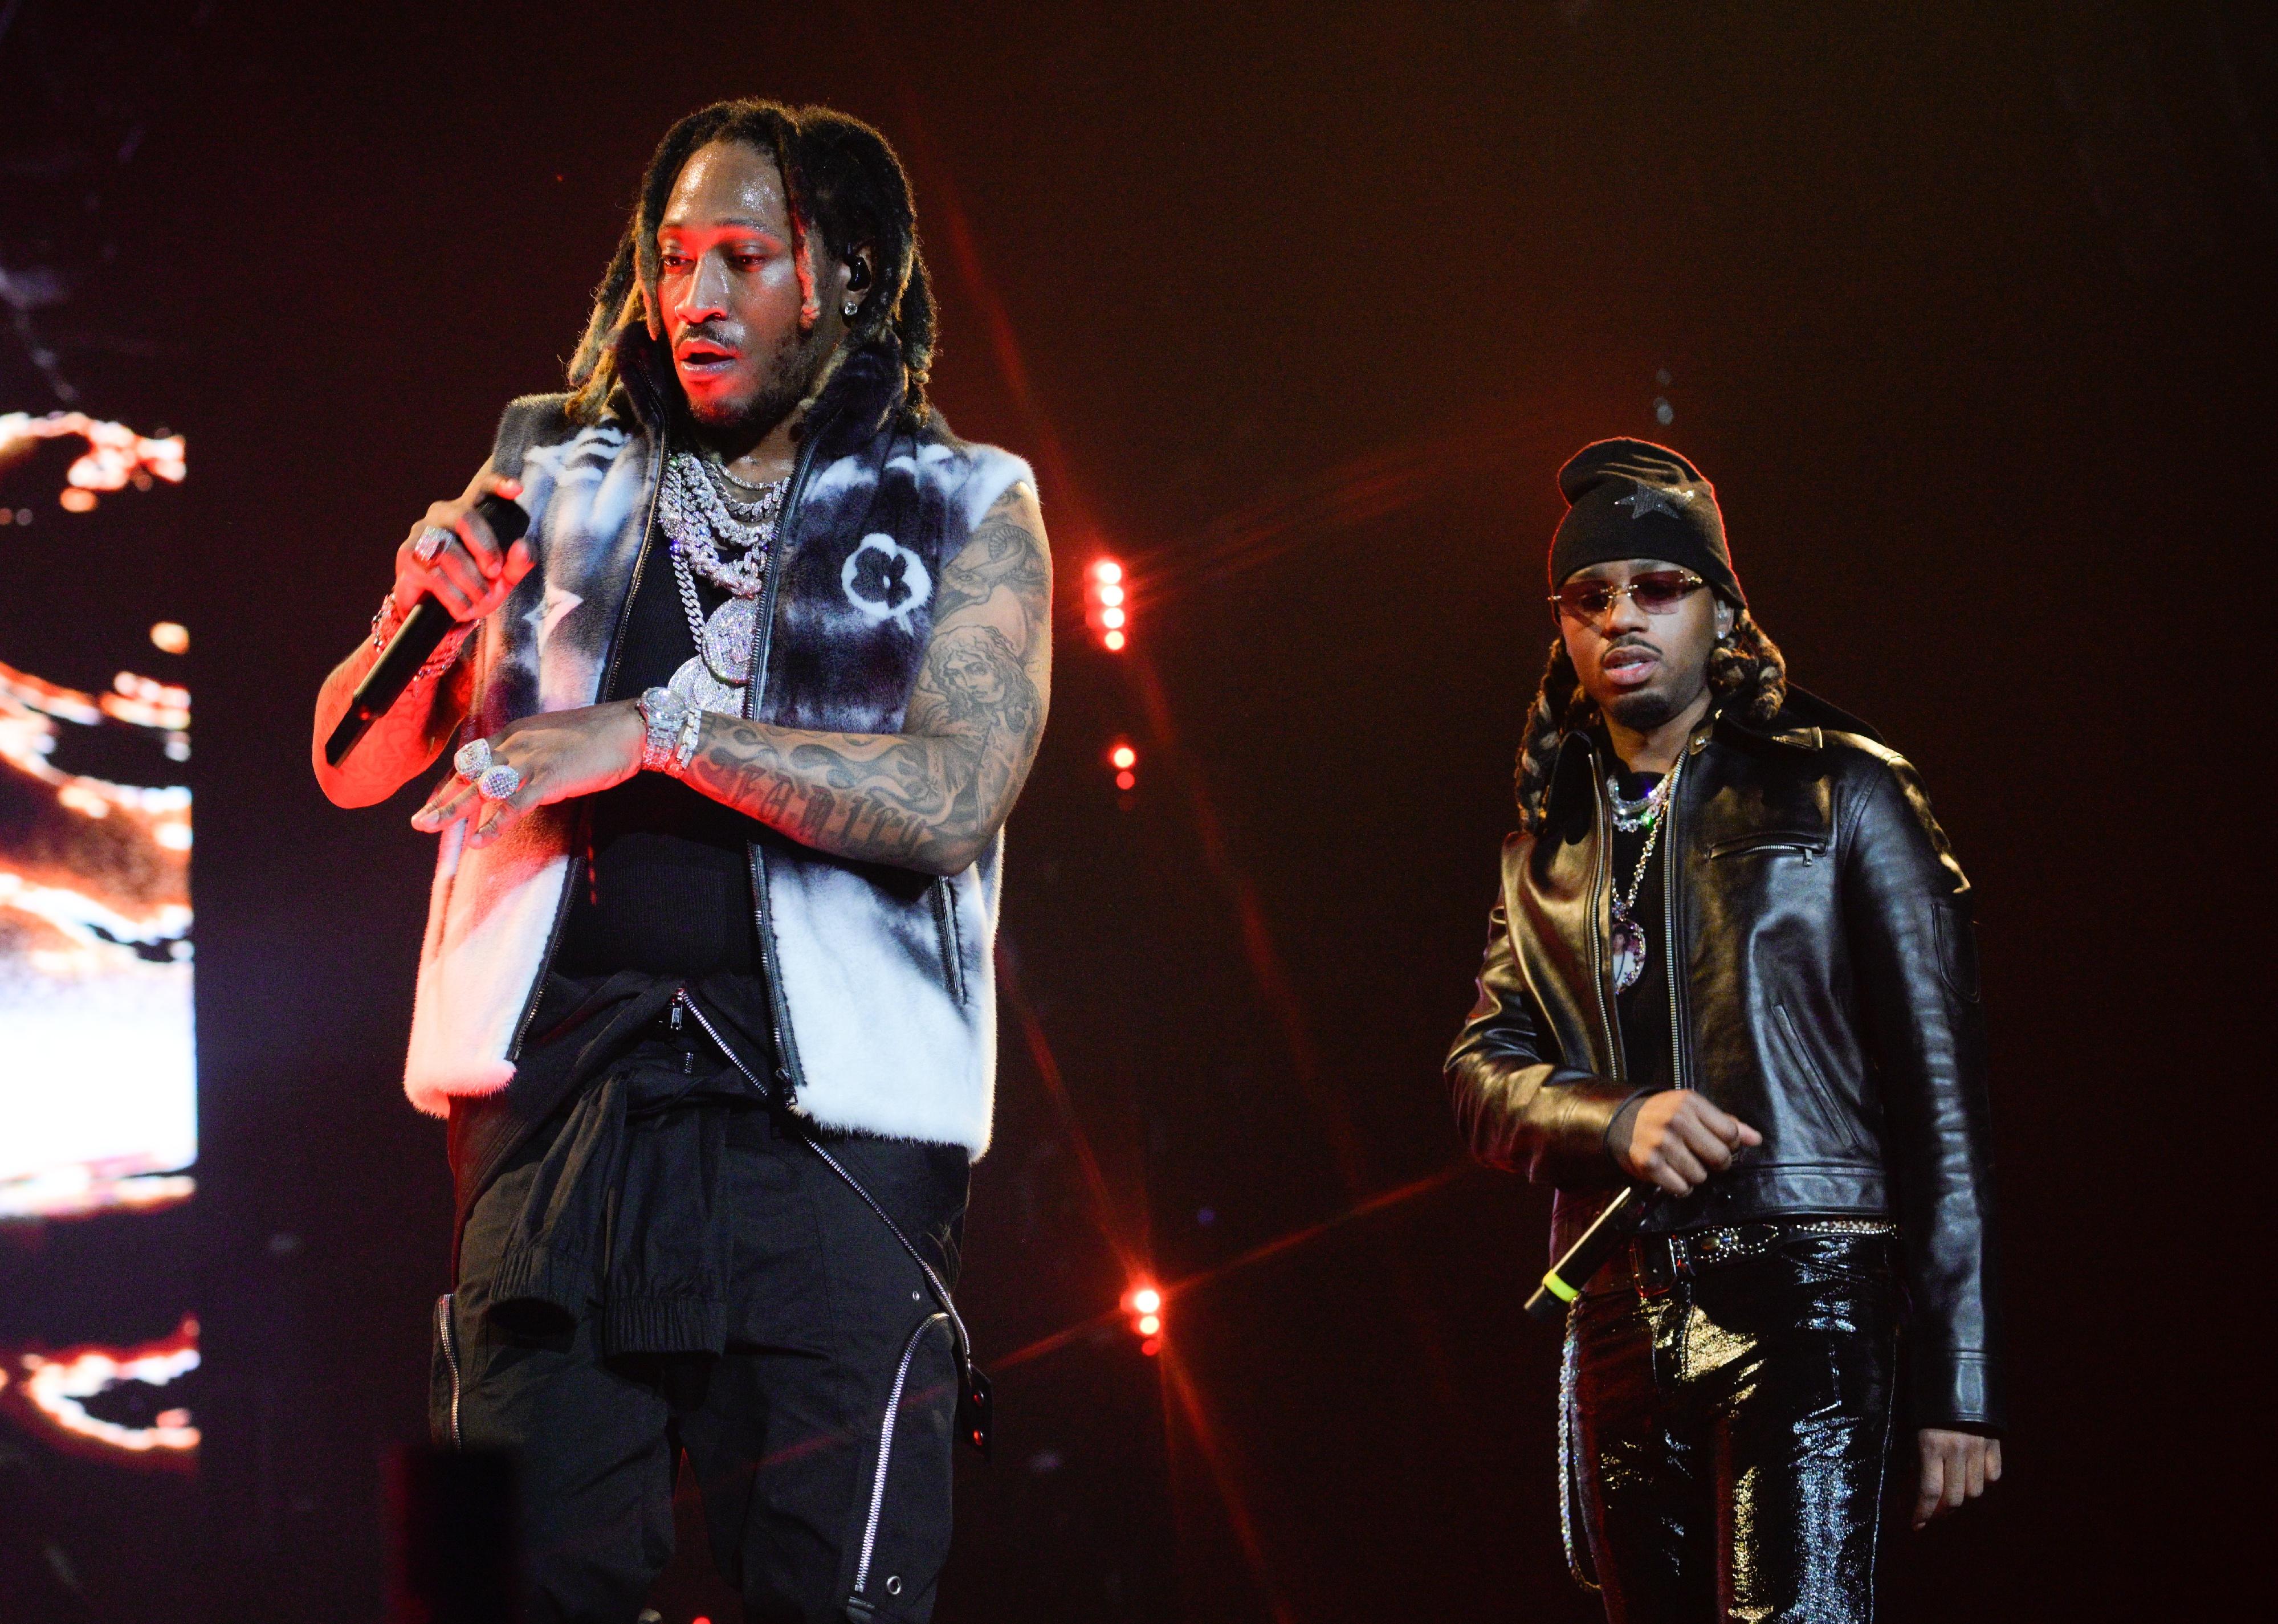 Future and Metro Boomin performing together onstage.